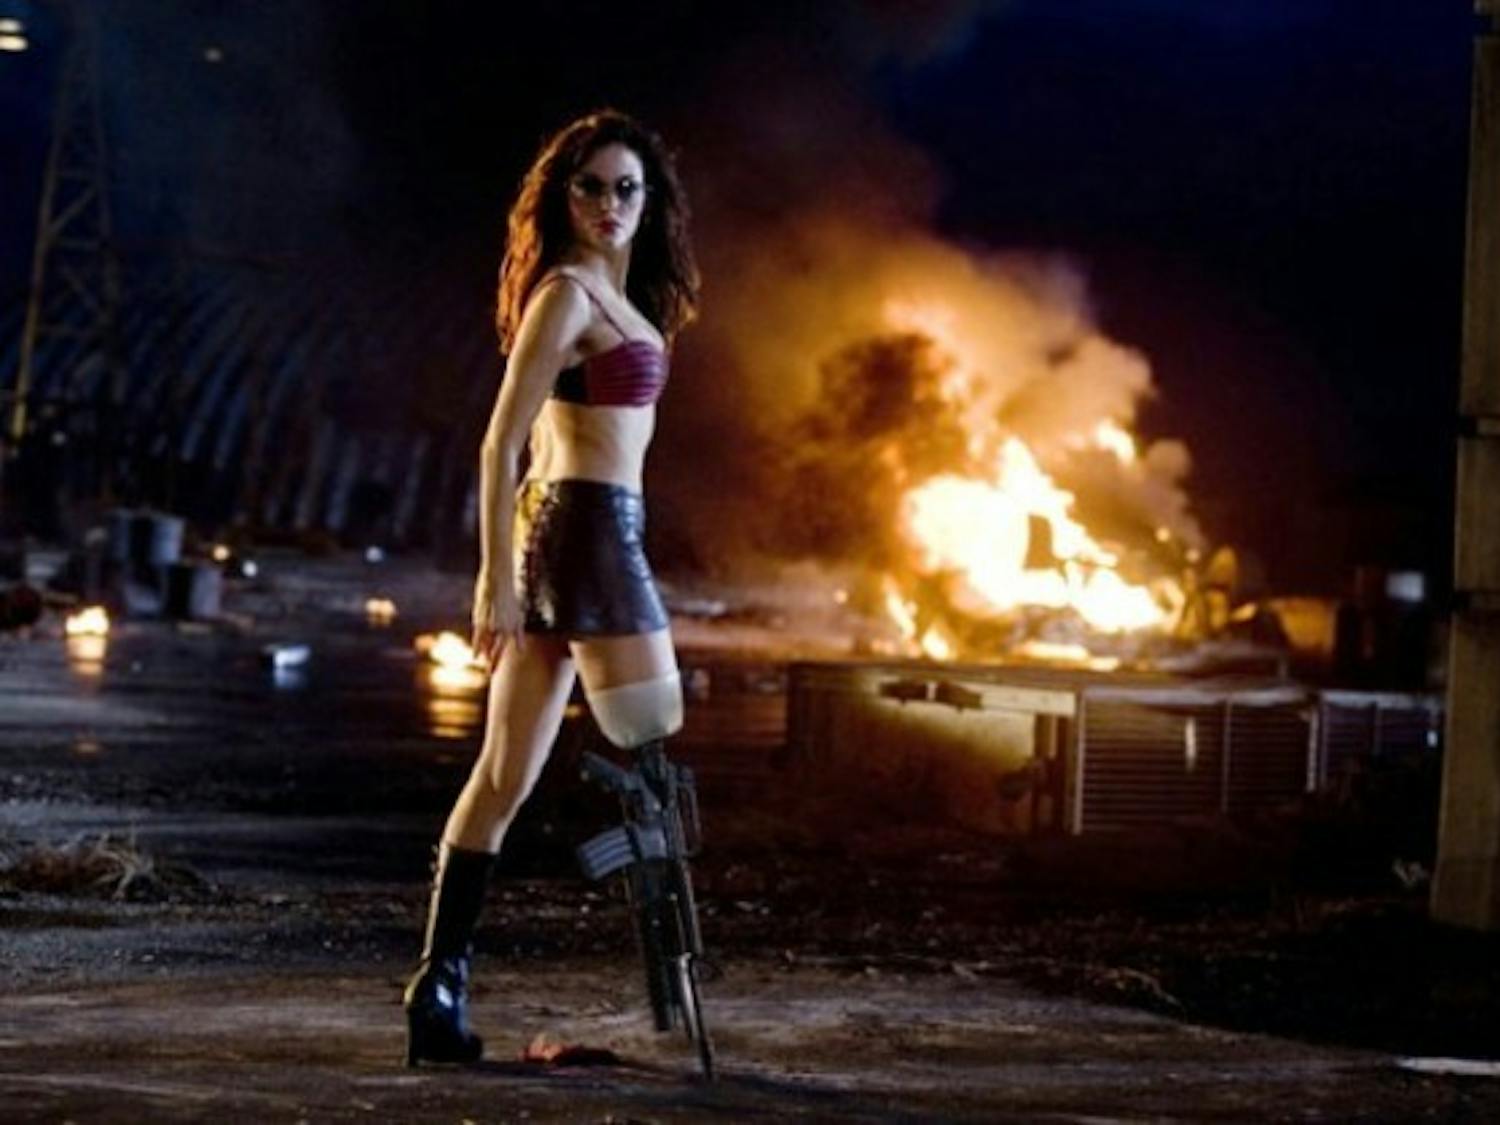 Rose McGowan shows off her assets as Cherry, a stripper-turned vigilante in Robert Rodriguez's 